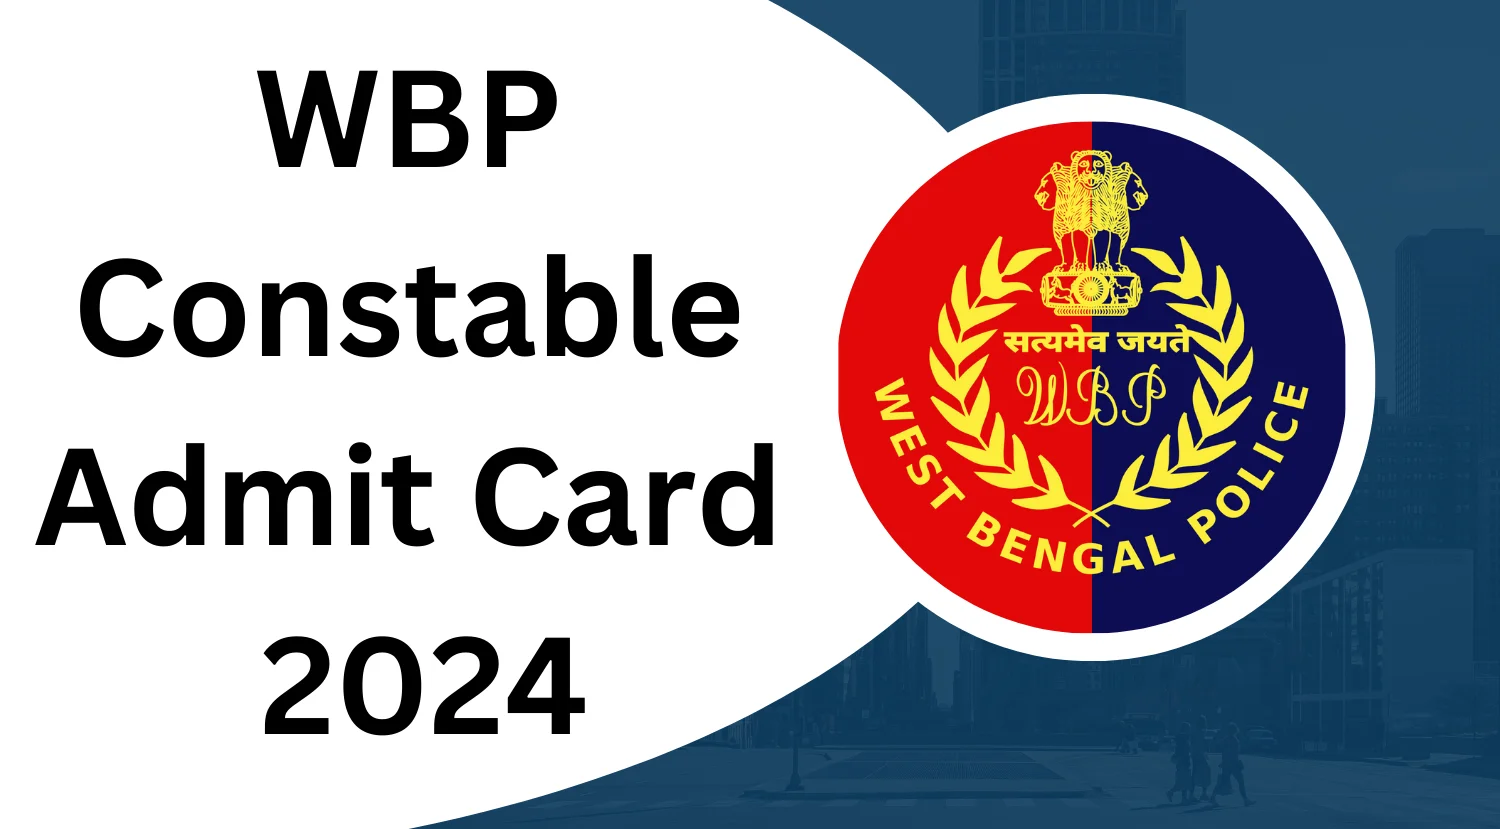 WBP Constable Admit Card 2024